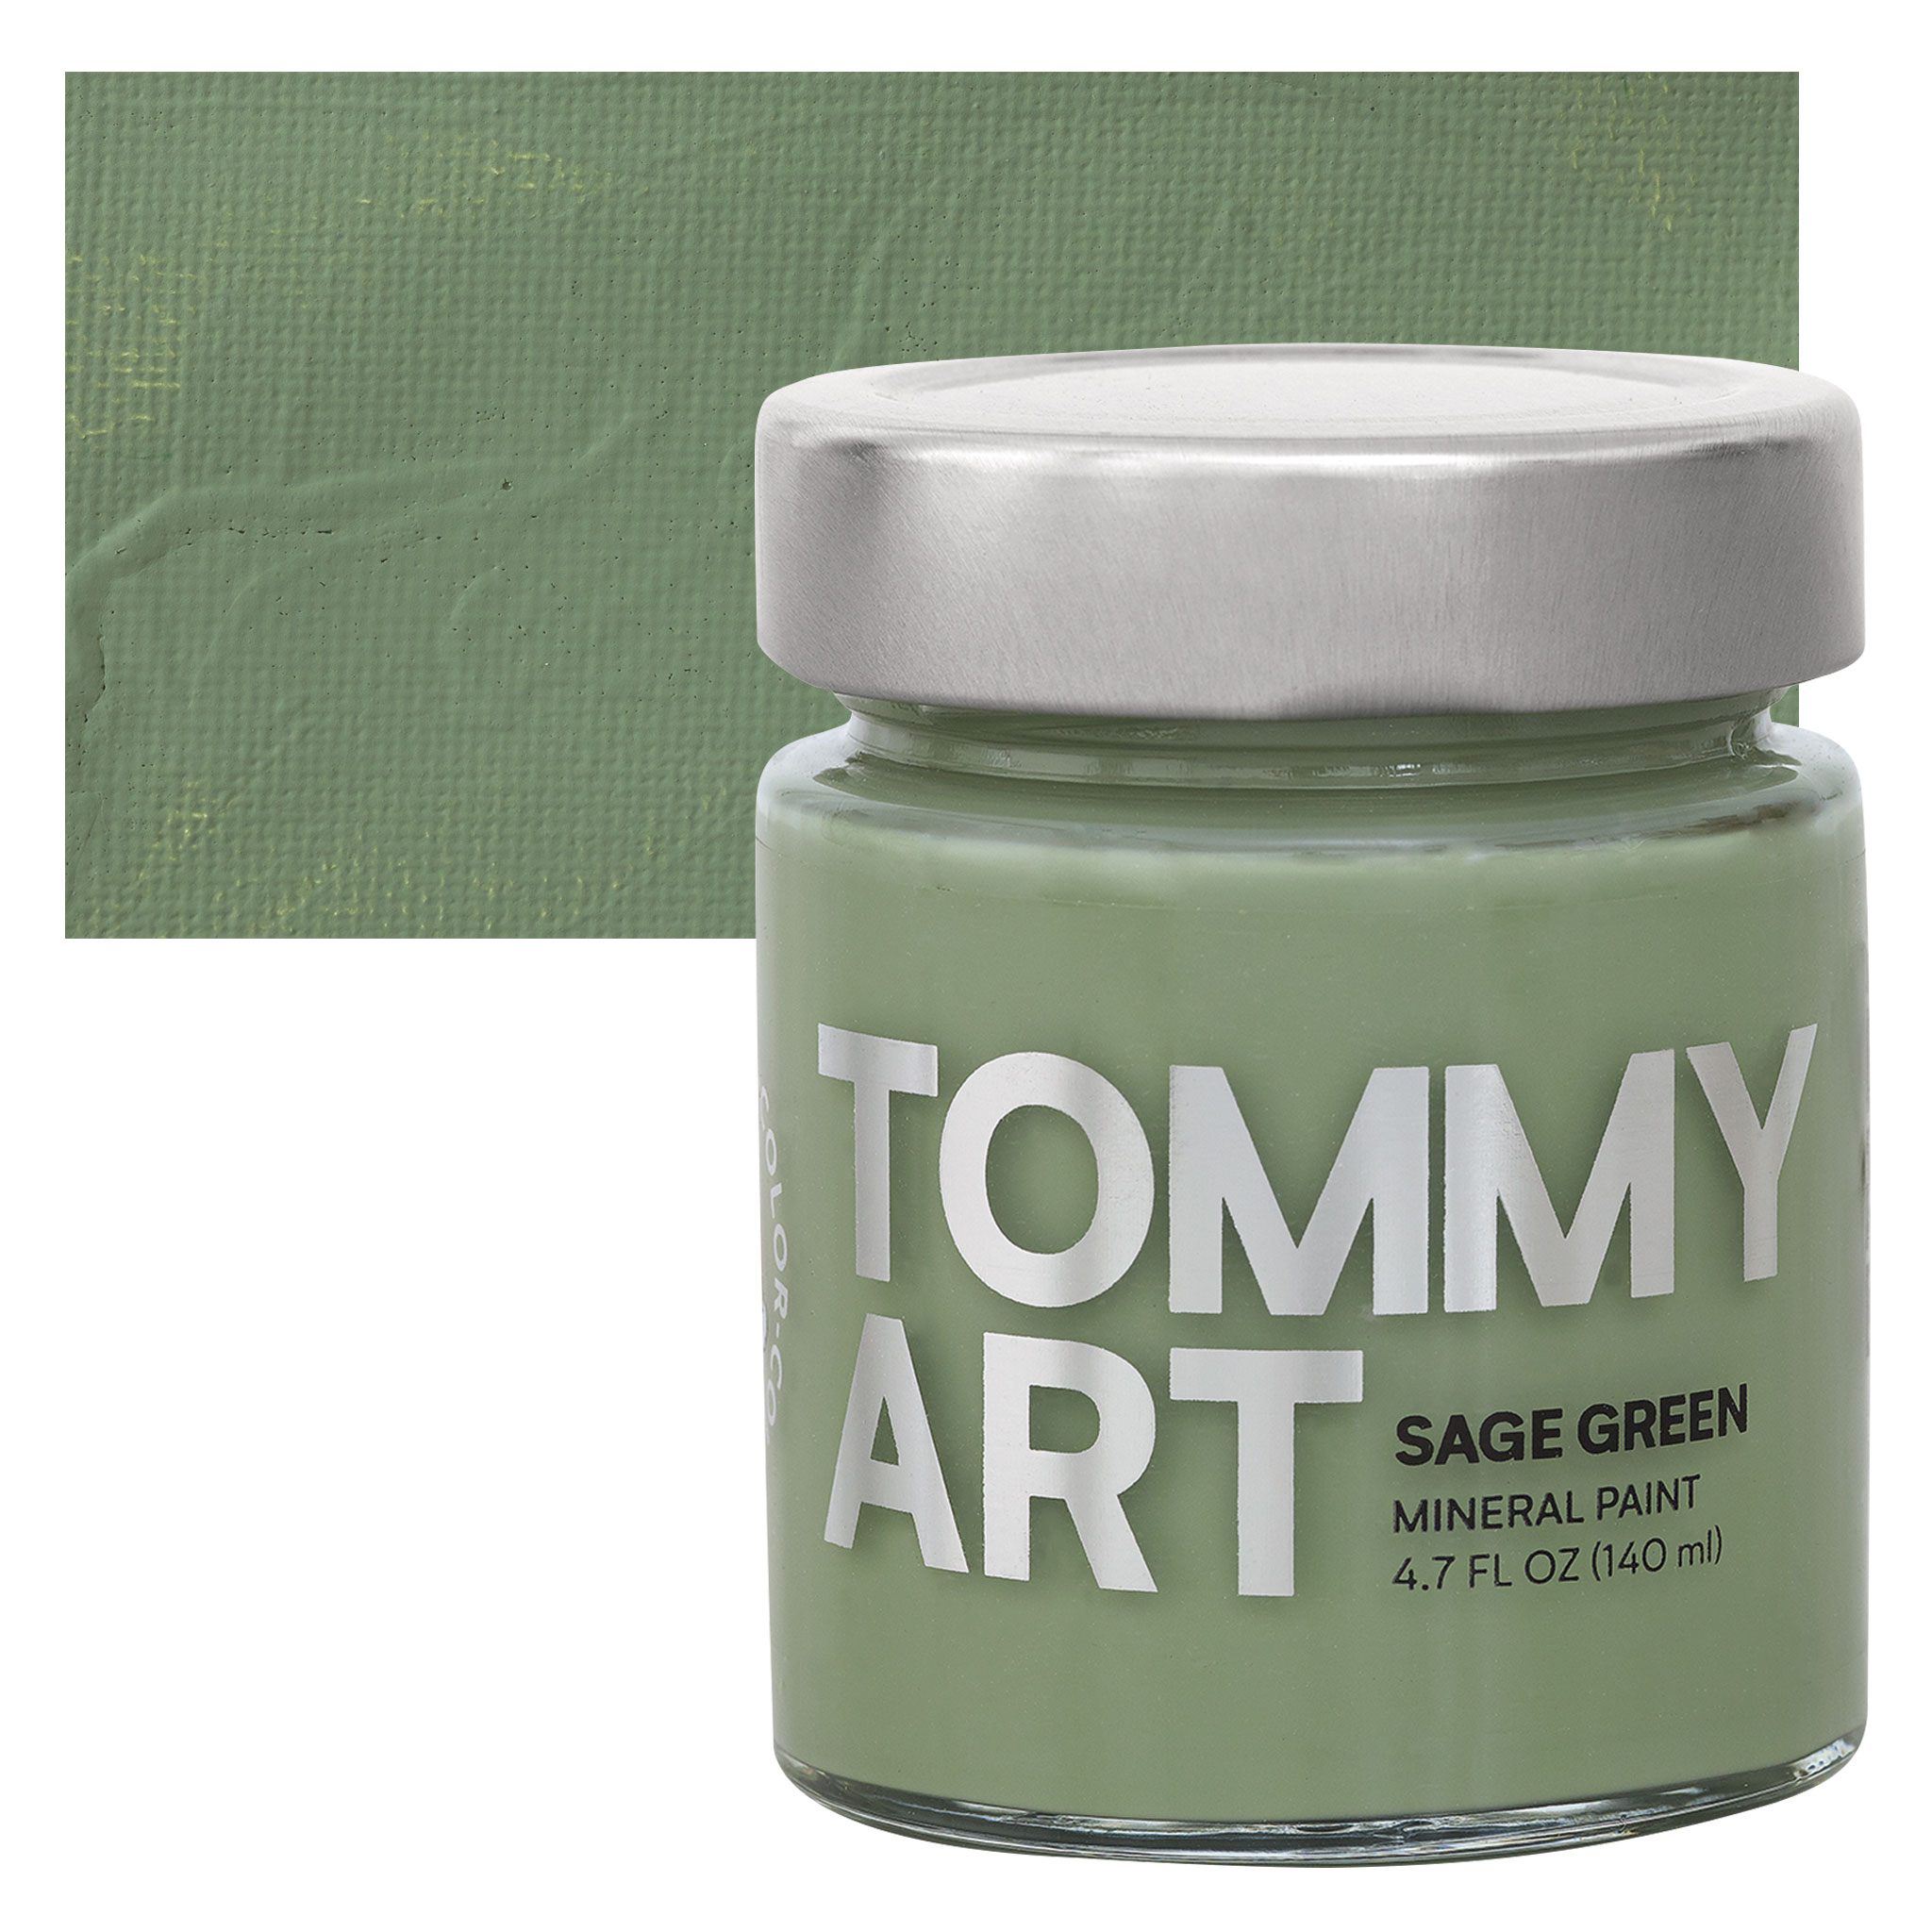 Tommy Art Color- Sage Green Mineral Paint 140ml Water-based Paint